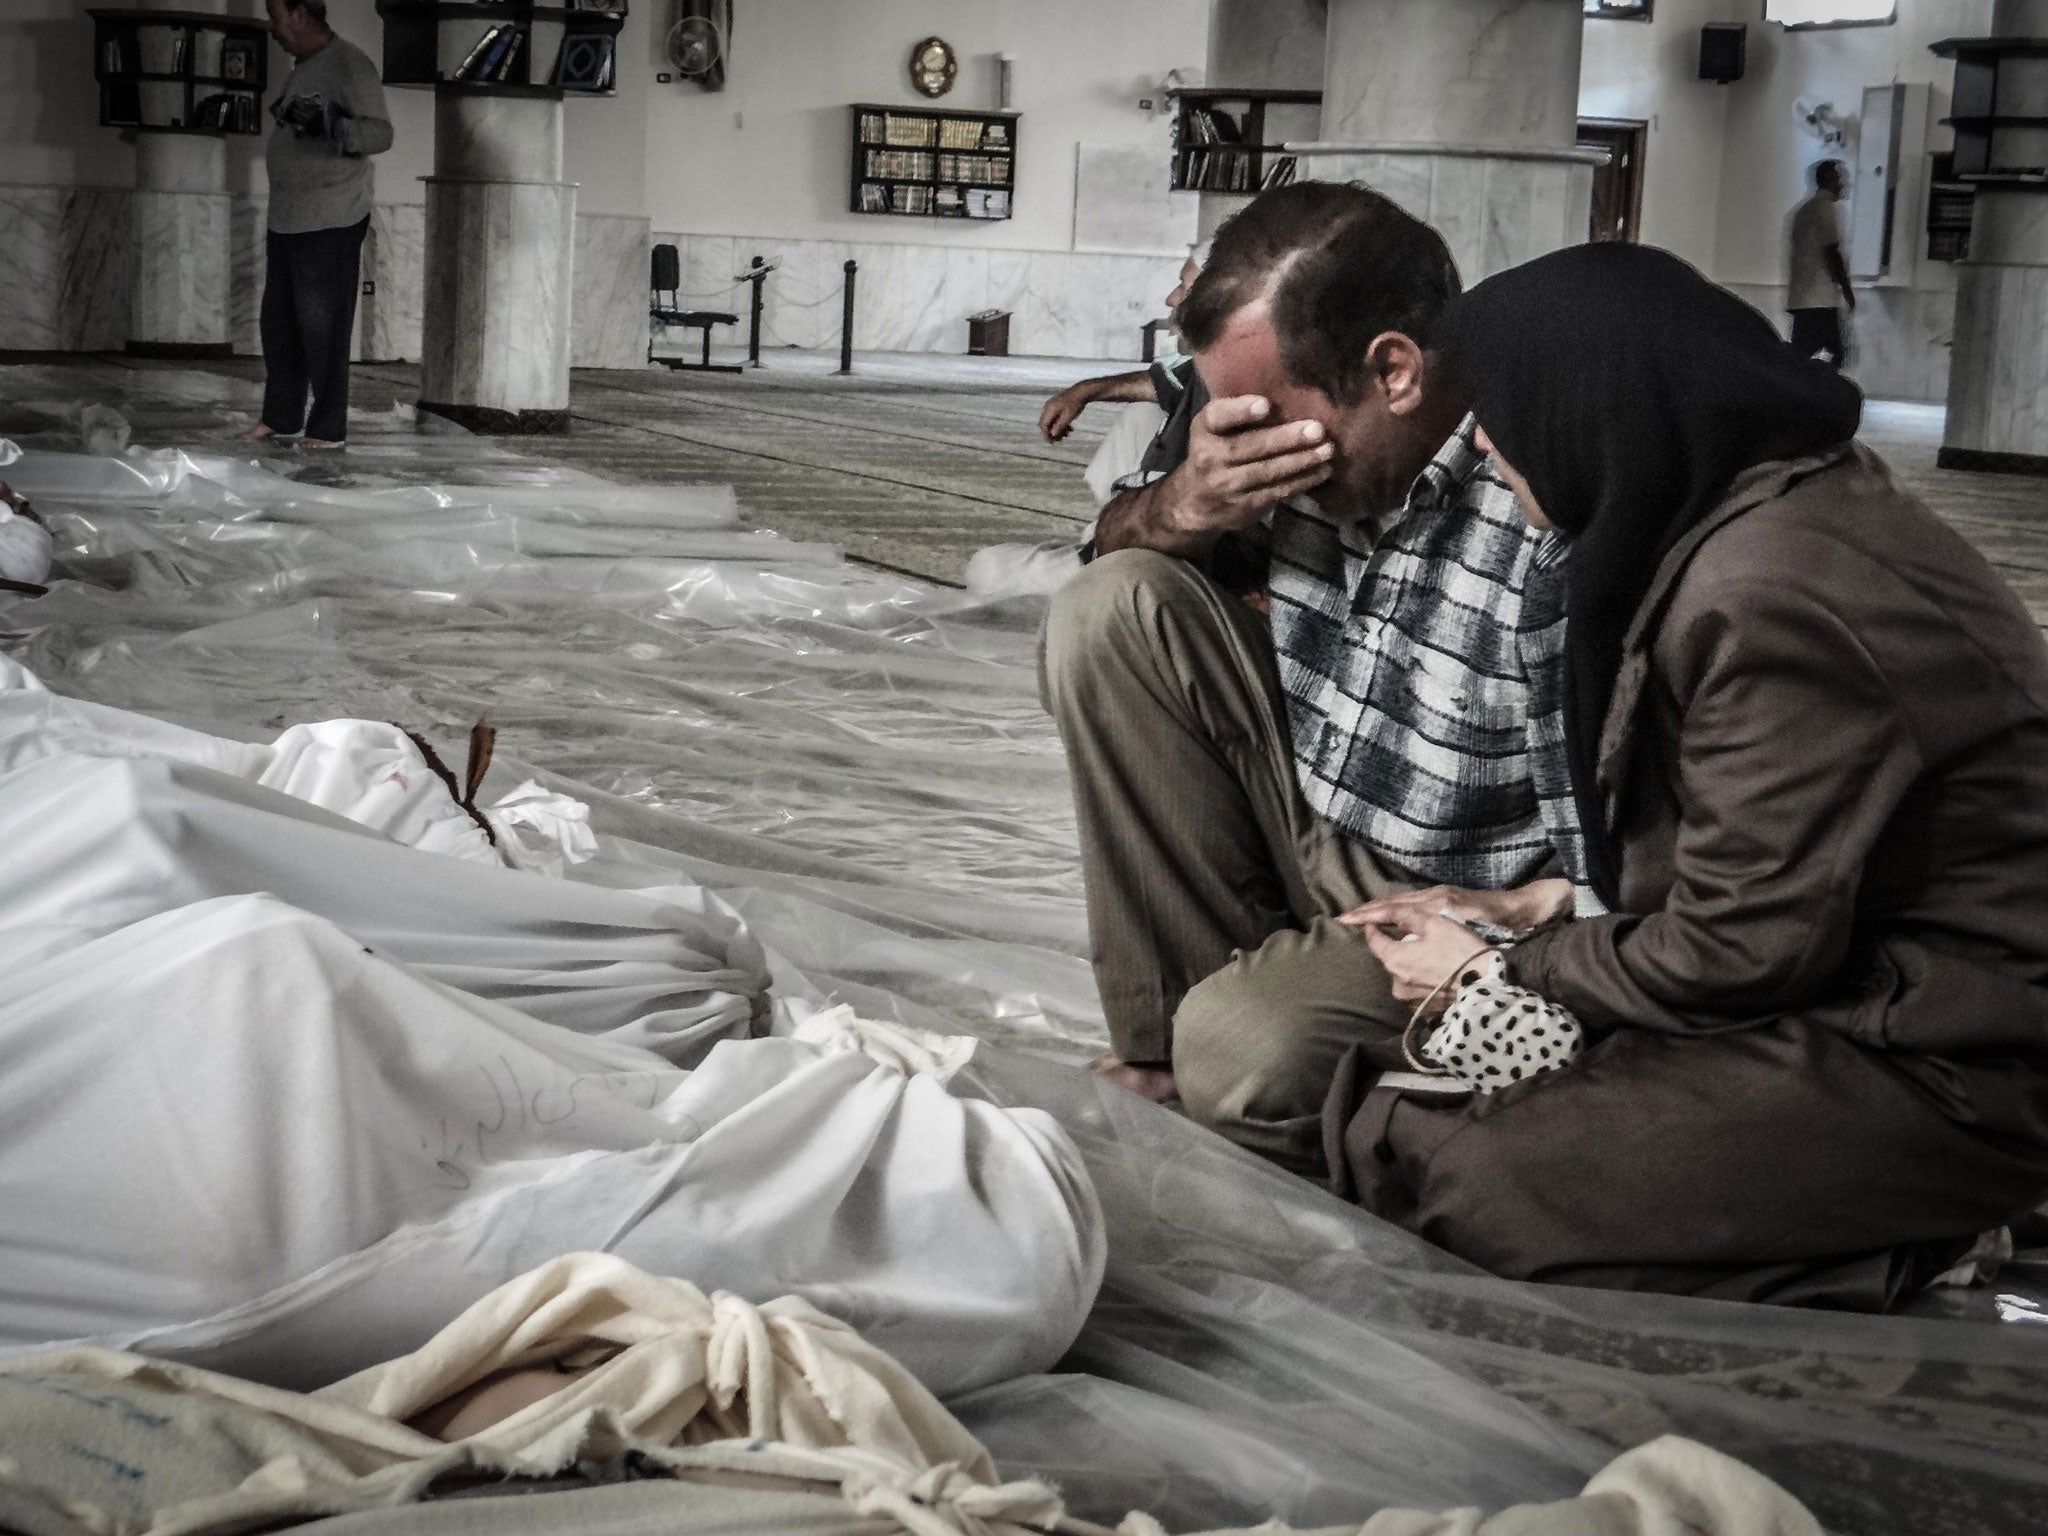 Parents grieve over the body of their child killed in a suspected chemical attack in Damascus